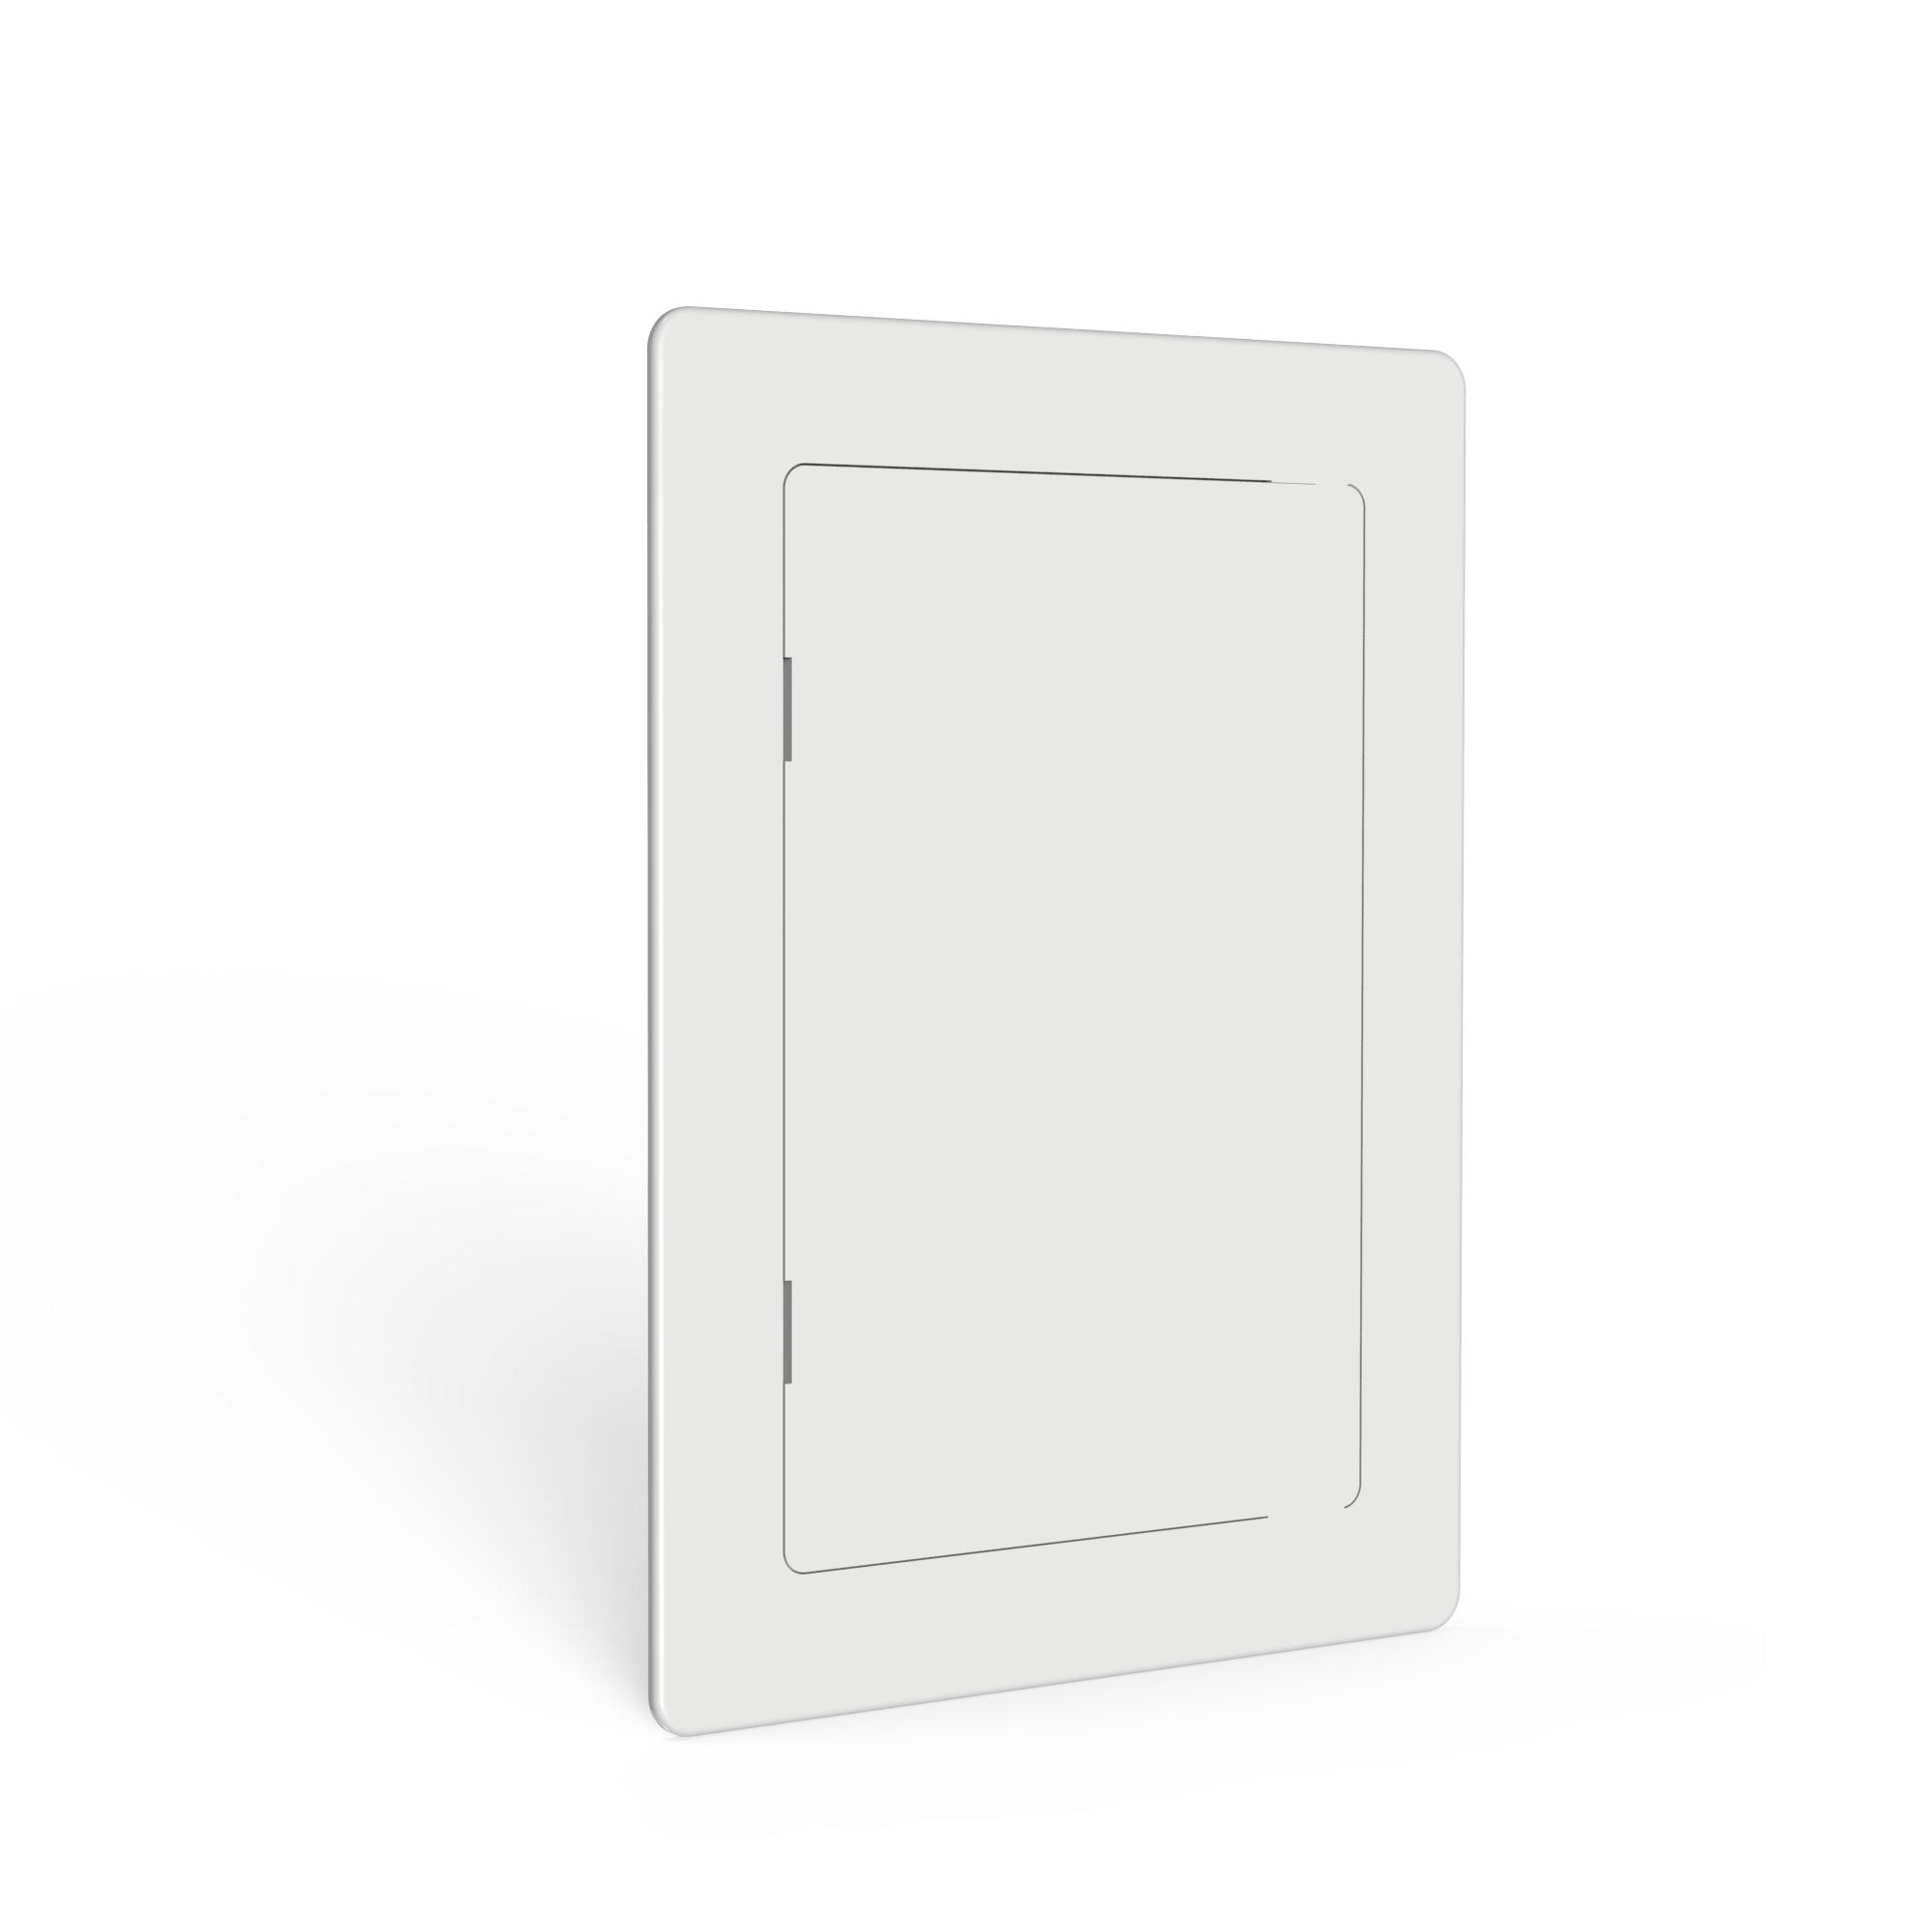 Is ABS Access Panel widely used in UK ?